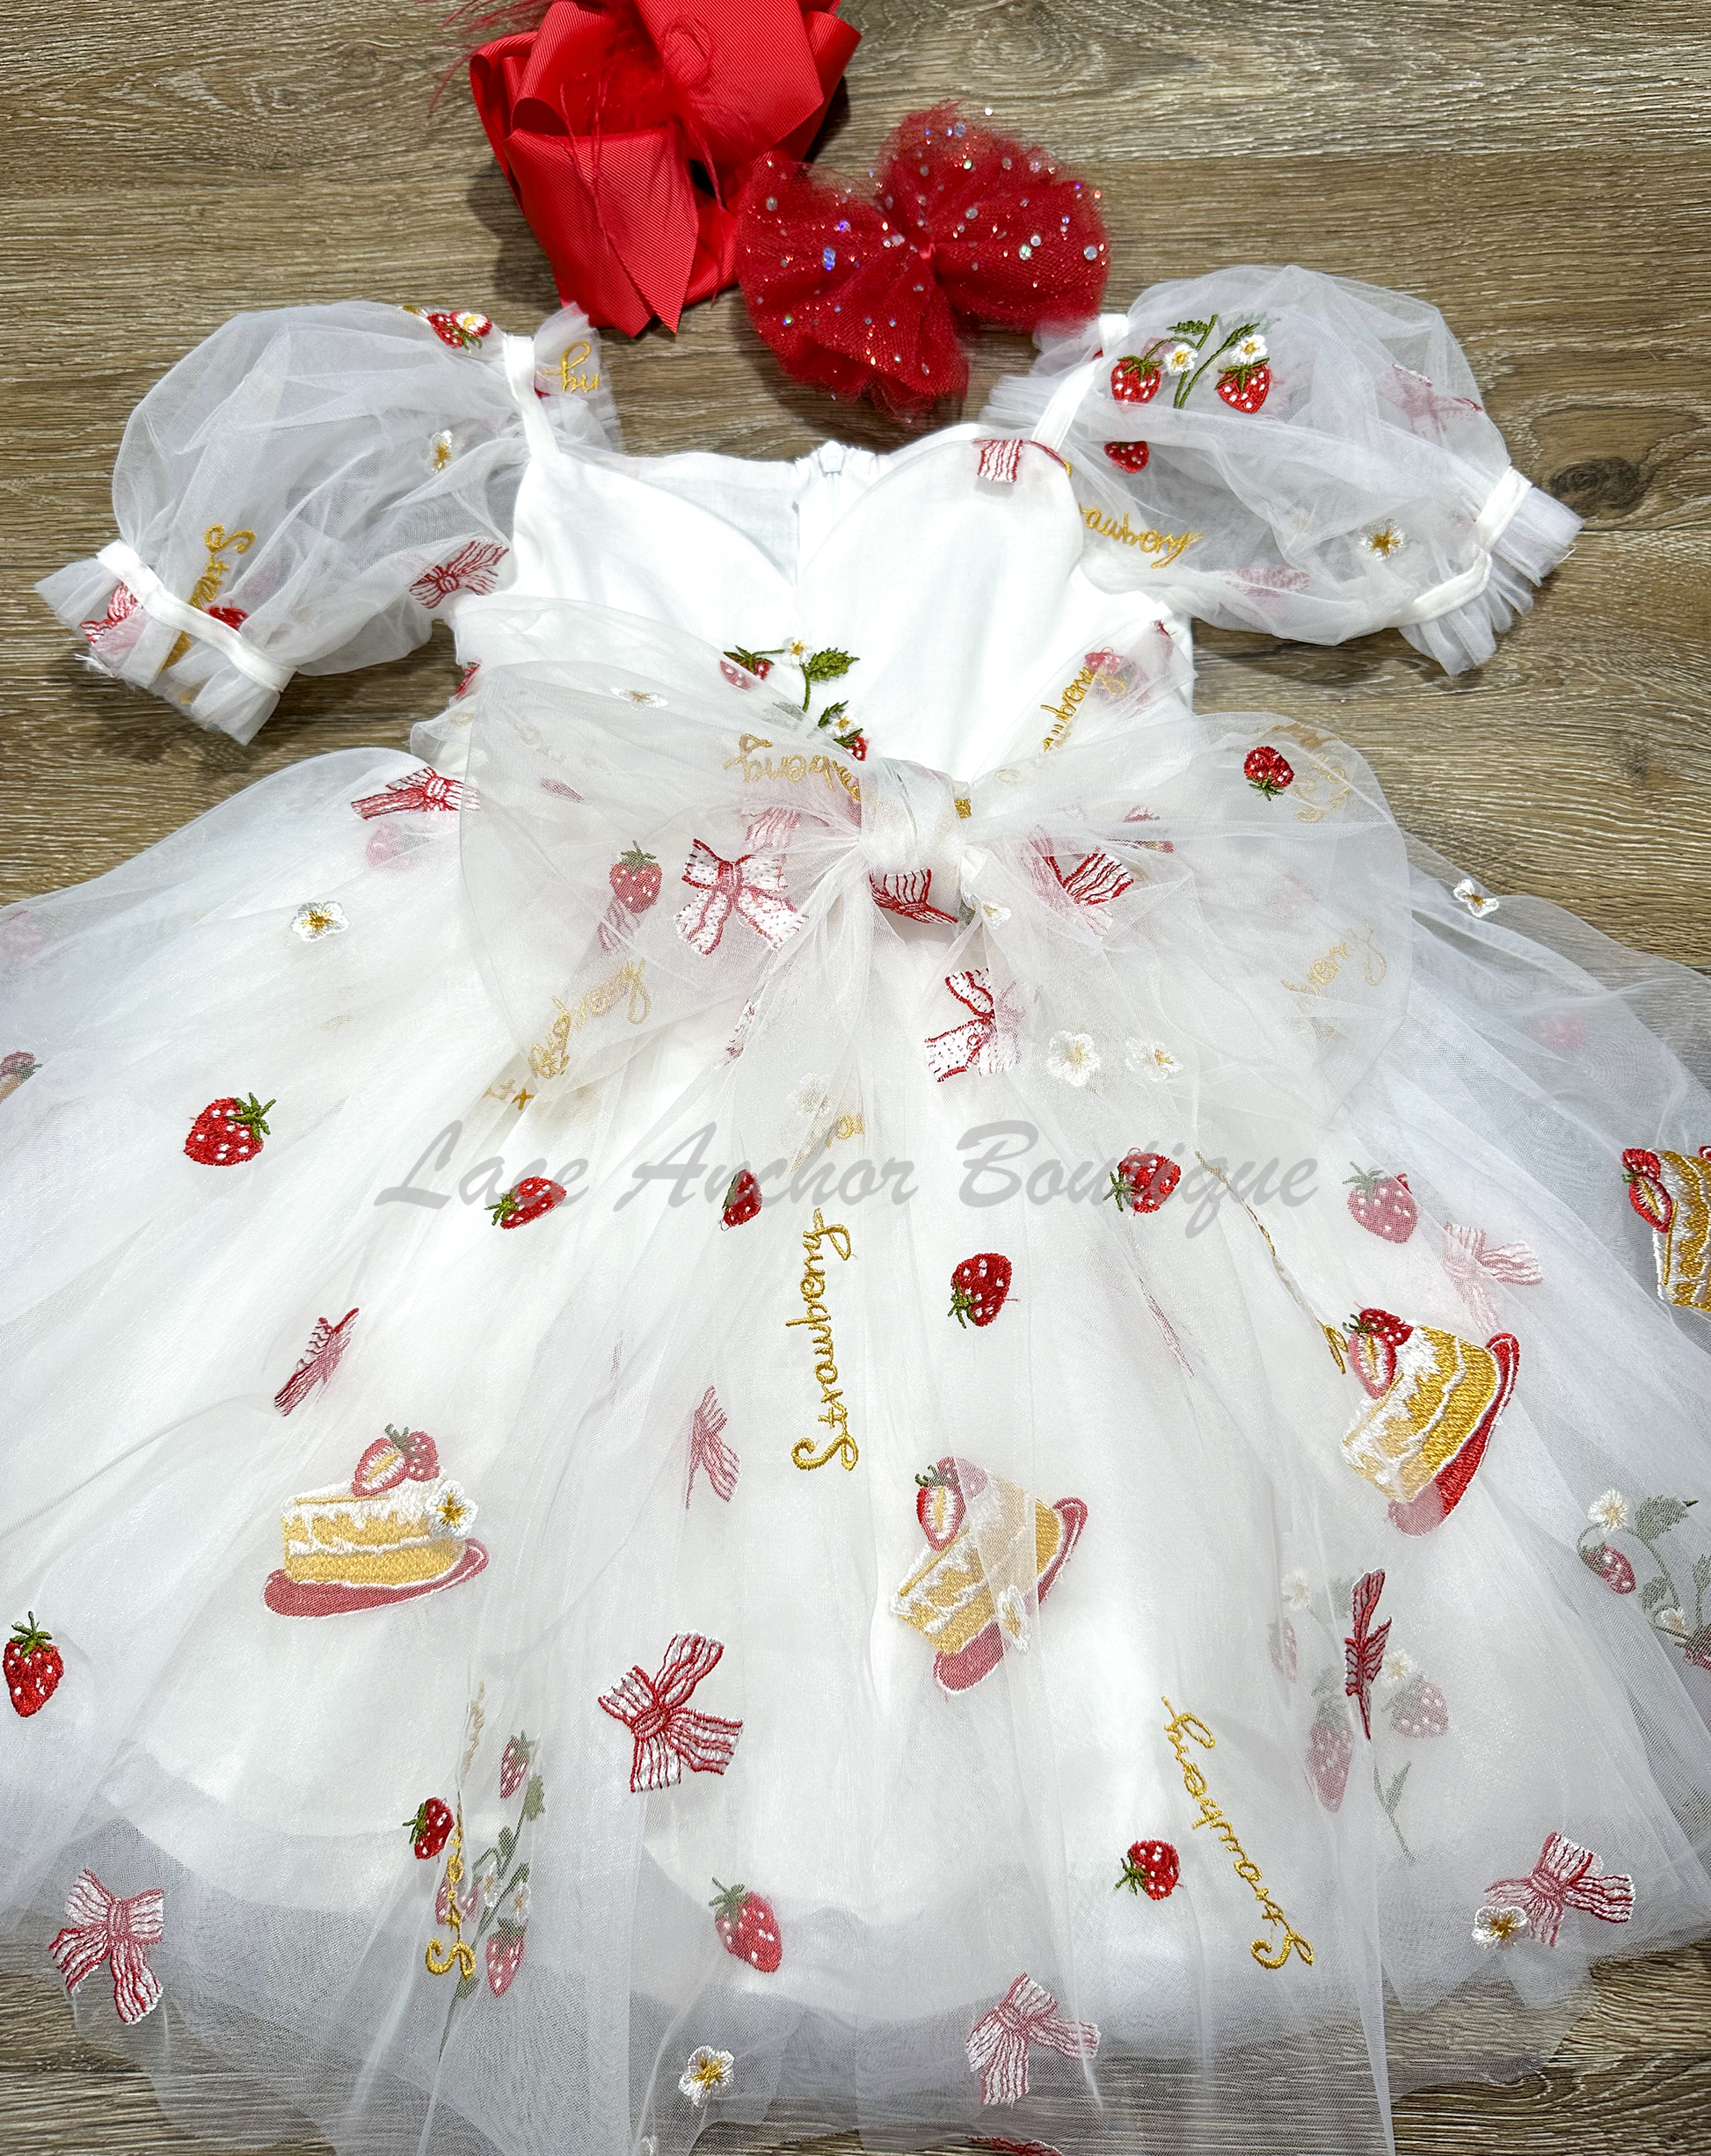 white dress with strawberries, bows, and strawberry shortcake embroidered print with large fluffy tied bow and puff sleeves.